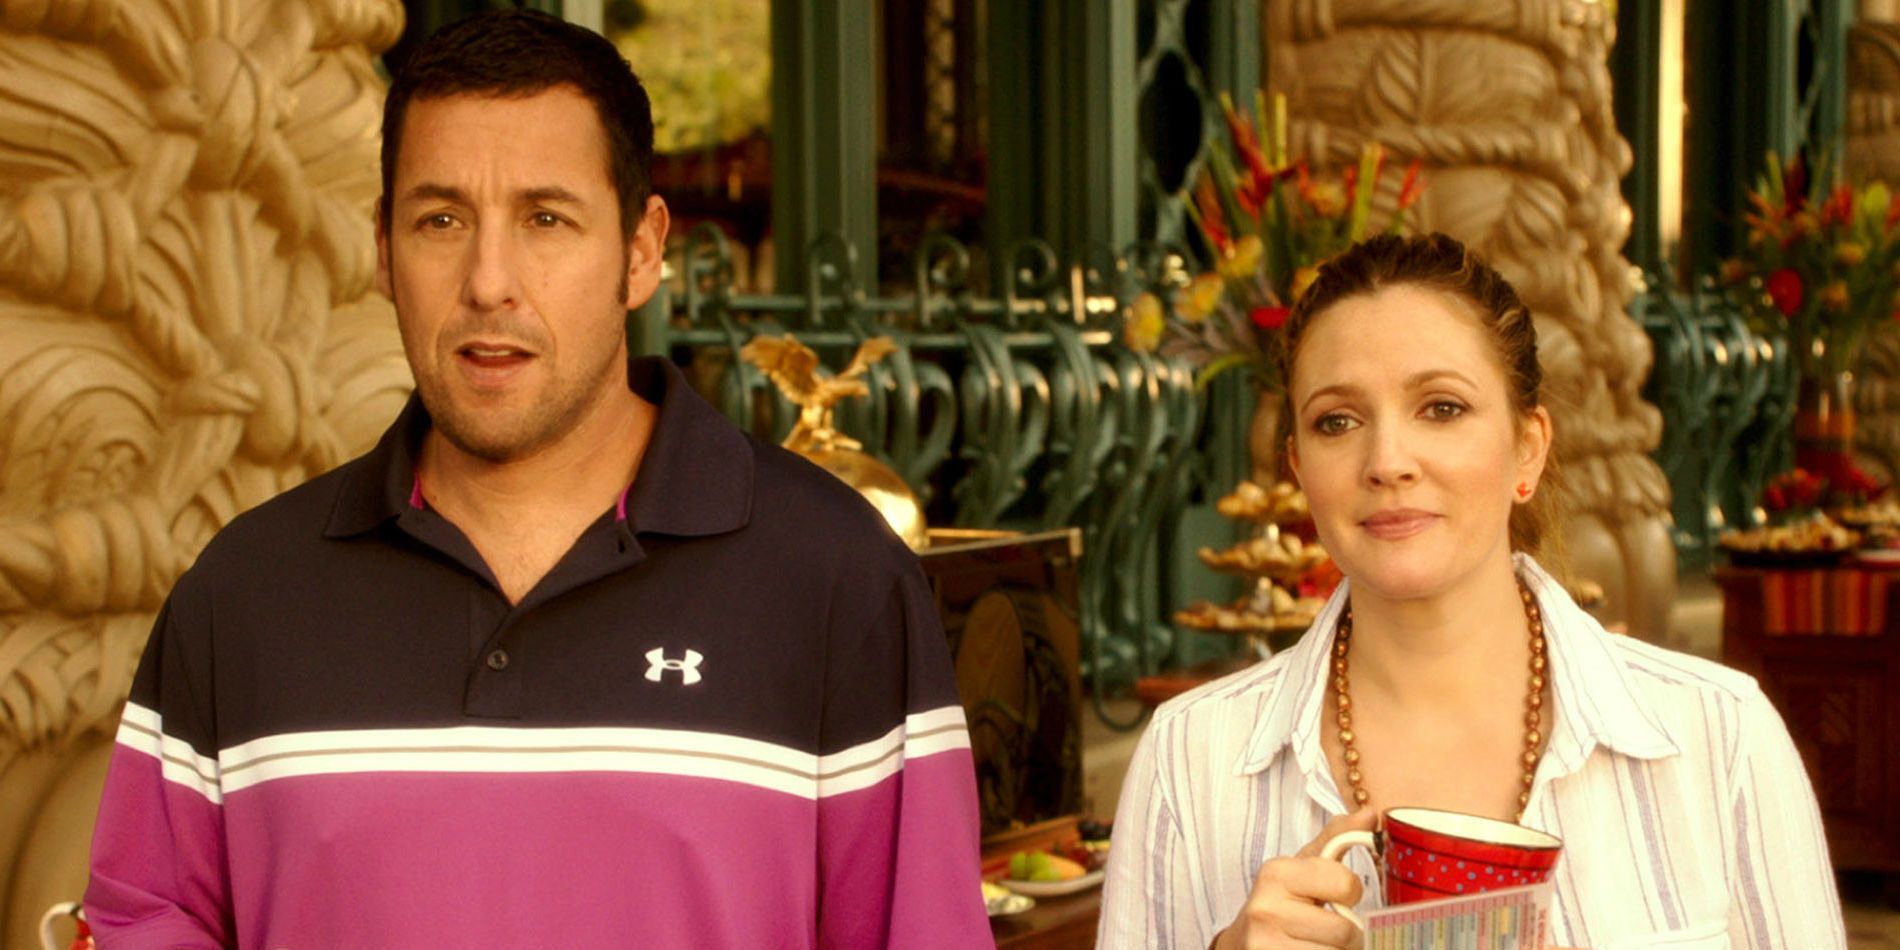 Adam Sandler and Drew Barrymore standing at a resort in Blended